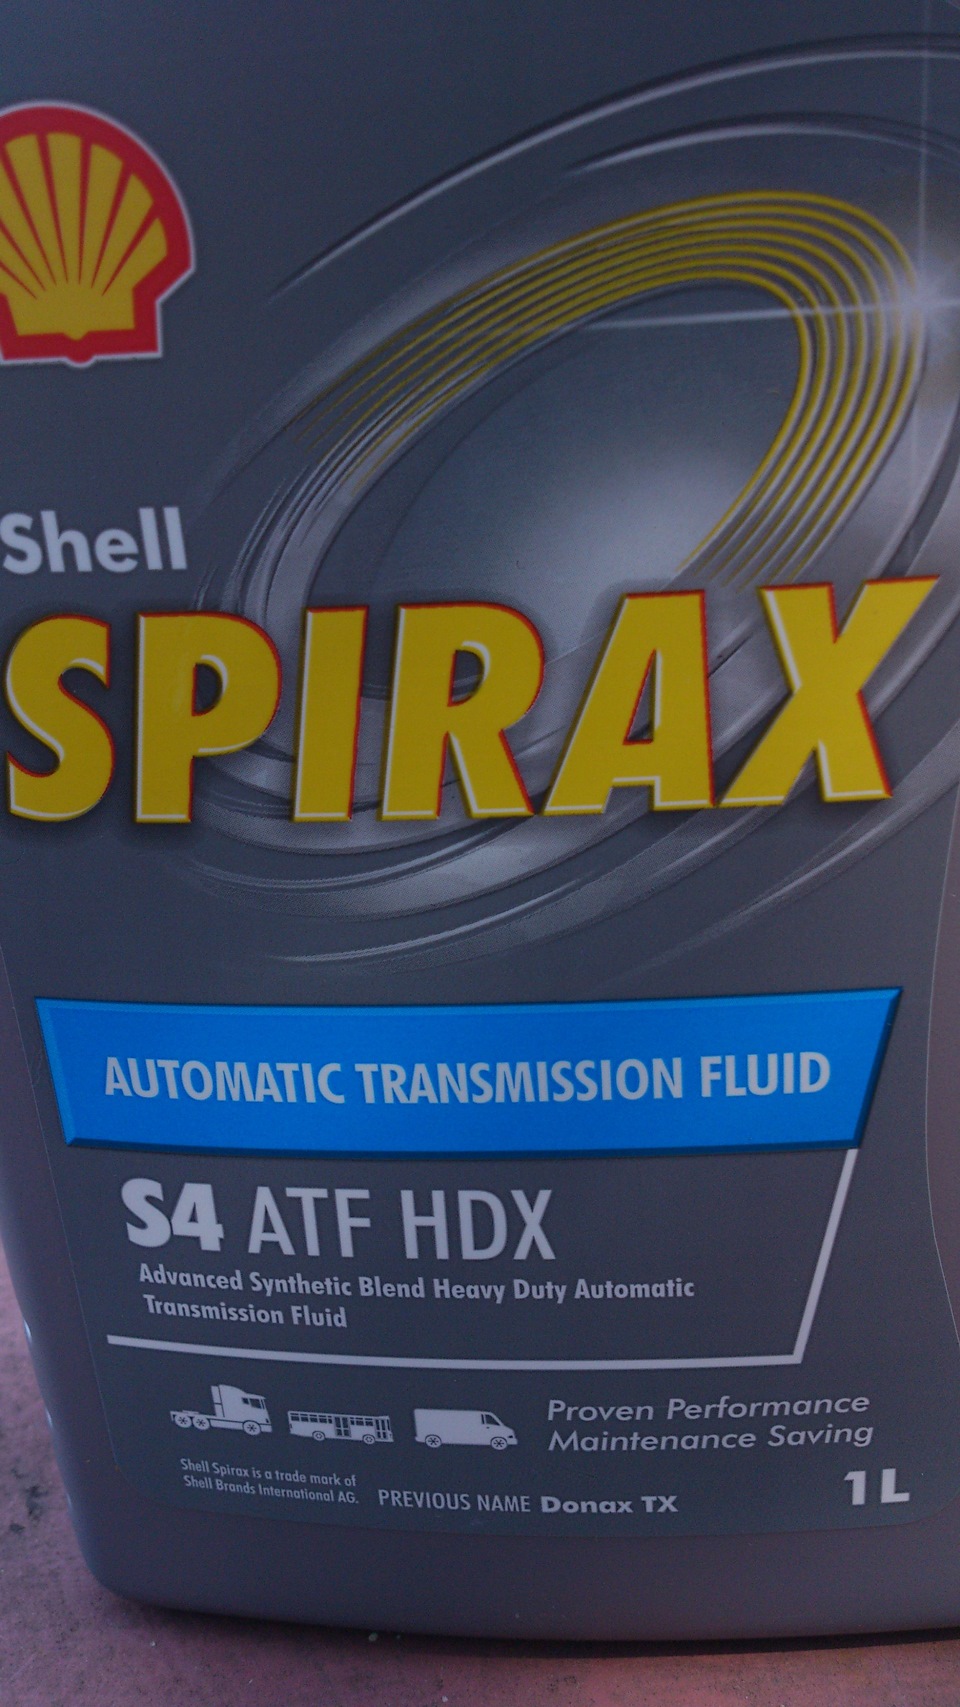 Spirax s4 atf. Shell Spirax s4 ATF hdx. Shell Spirax s4 ATF hdx бочка. Shell Spirax s4 ATF hdx drive2. Shell ATF Donax 1 л.